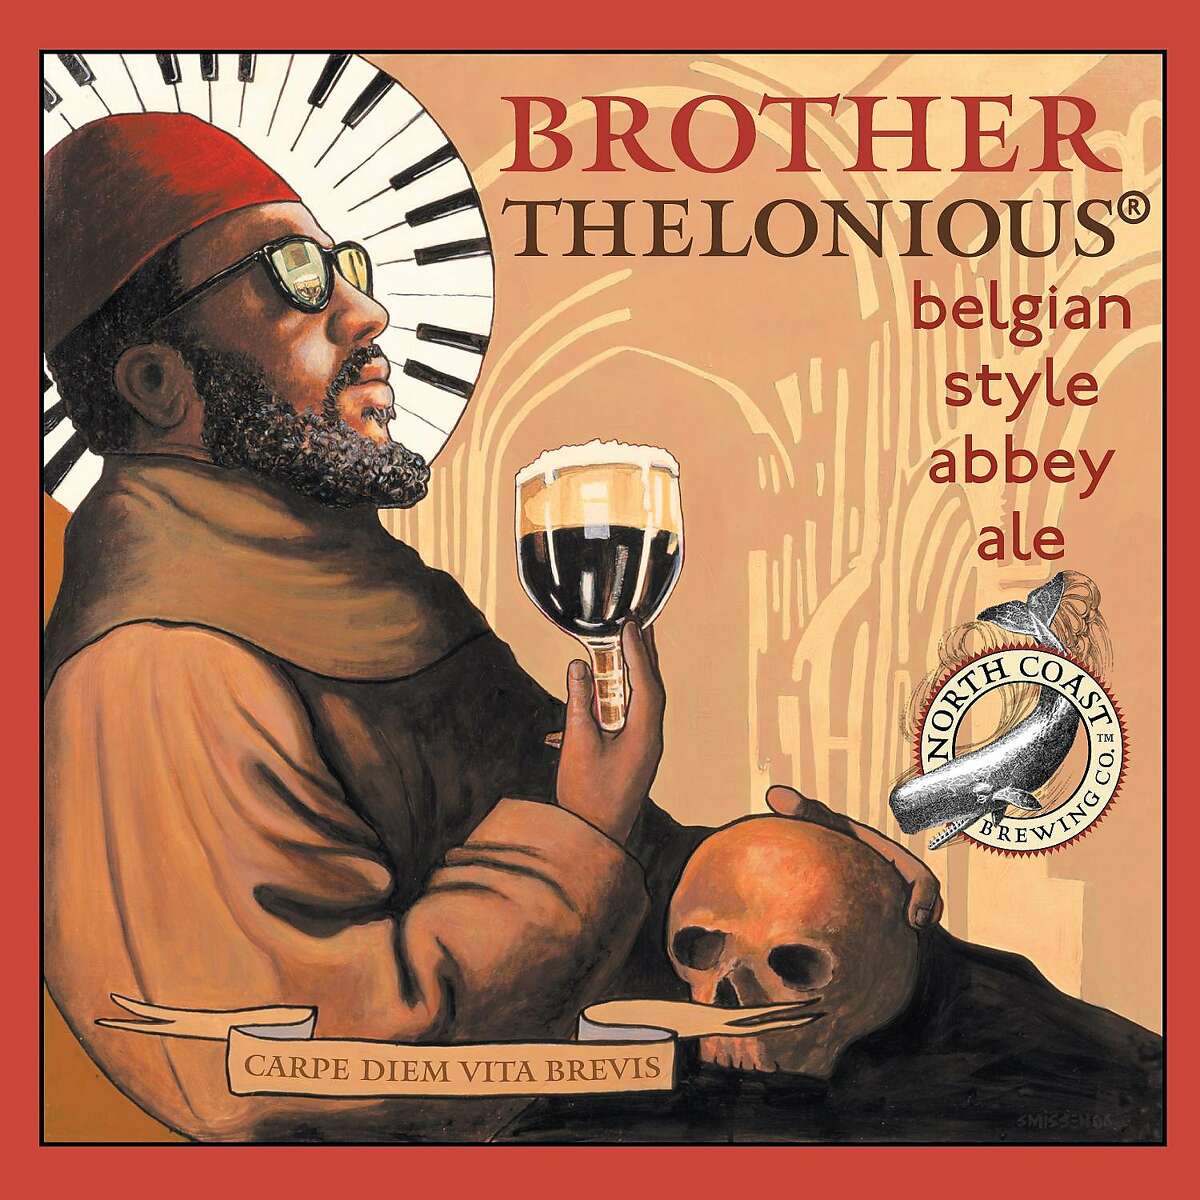 North Coast Brewing Co. Brother Thelonious Belgian-style abbey ale label.